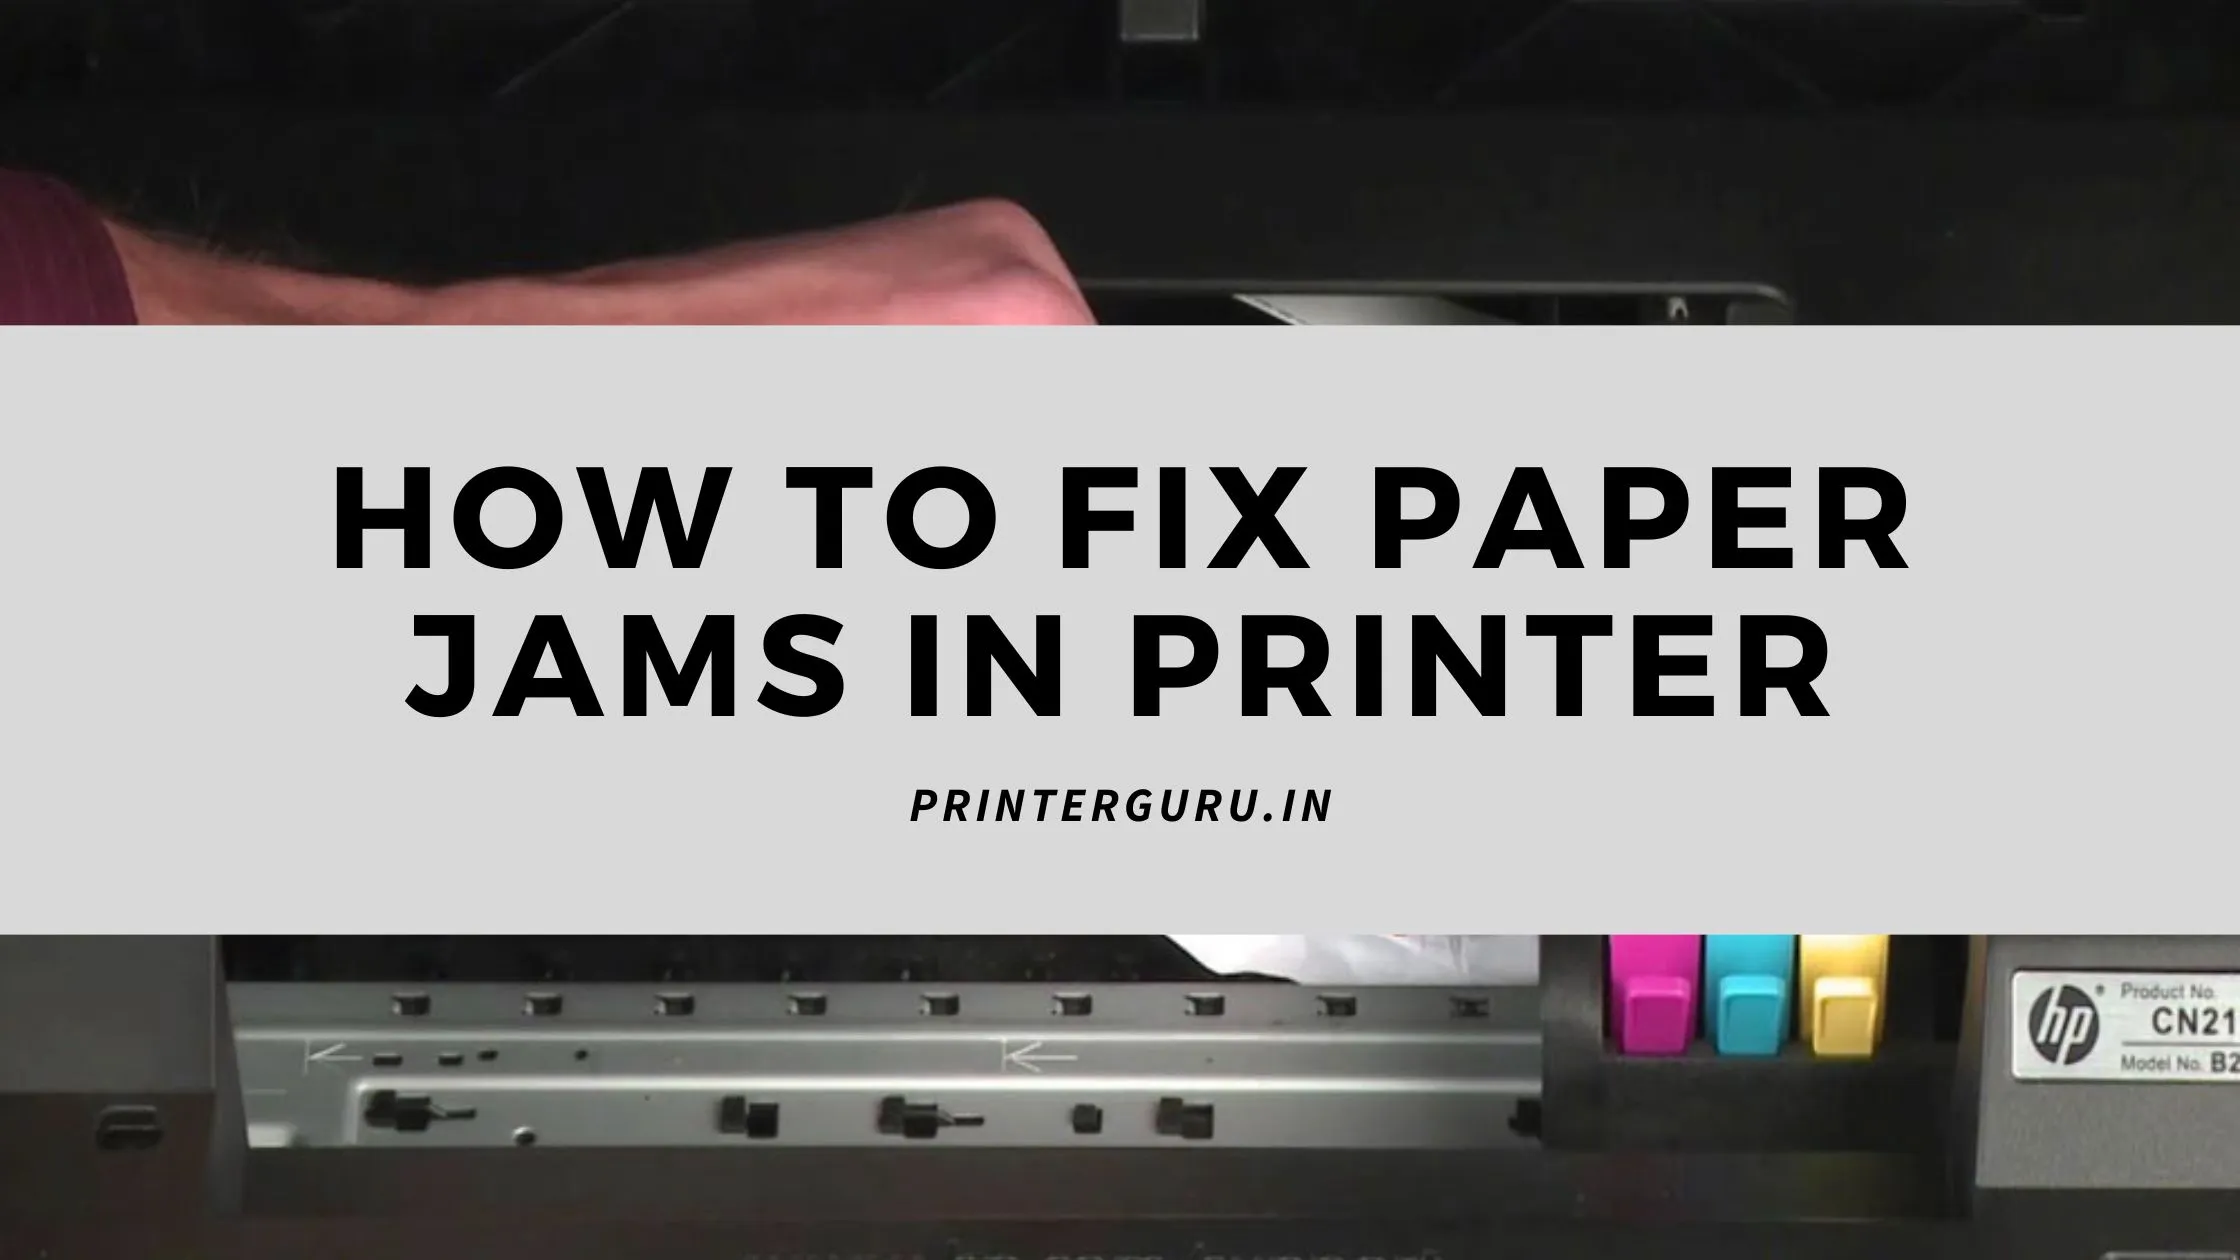 How to fix paper jams in printer